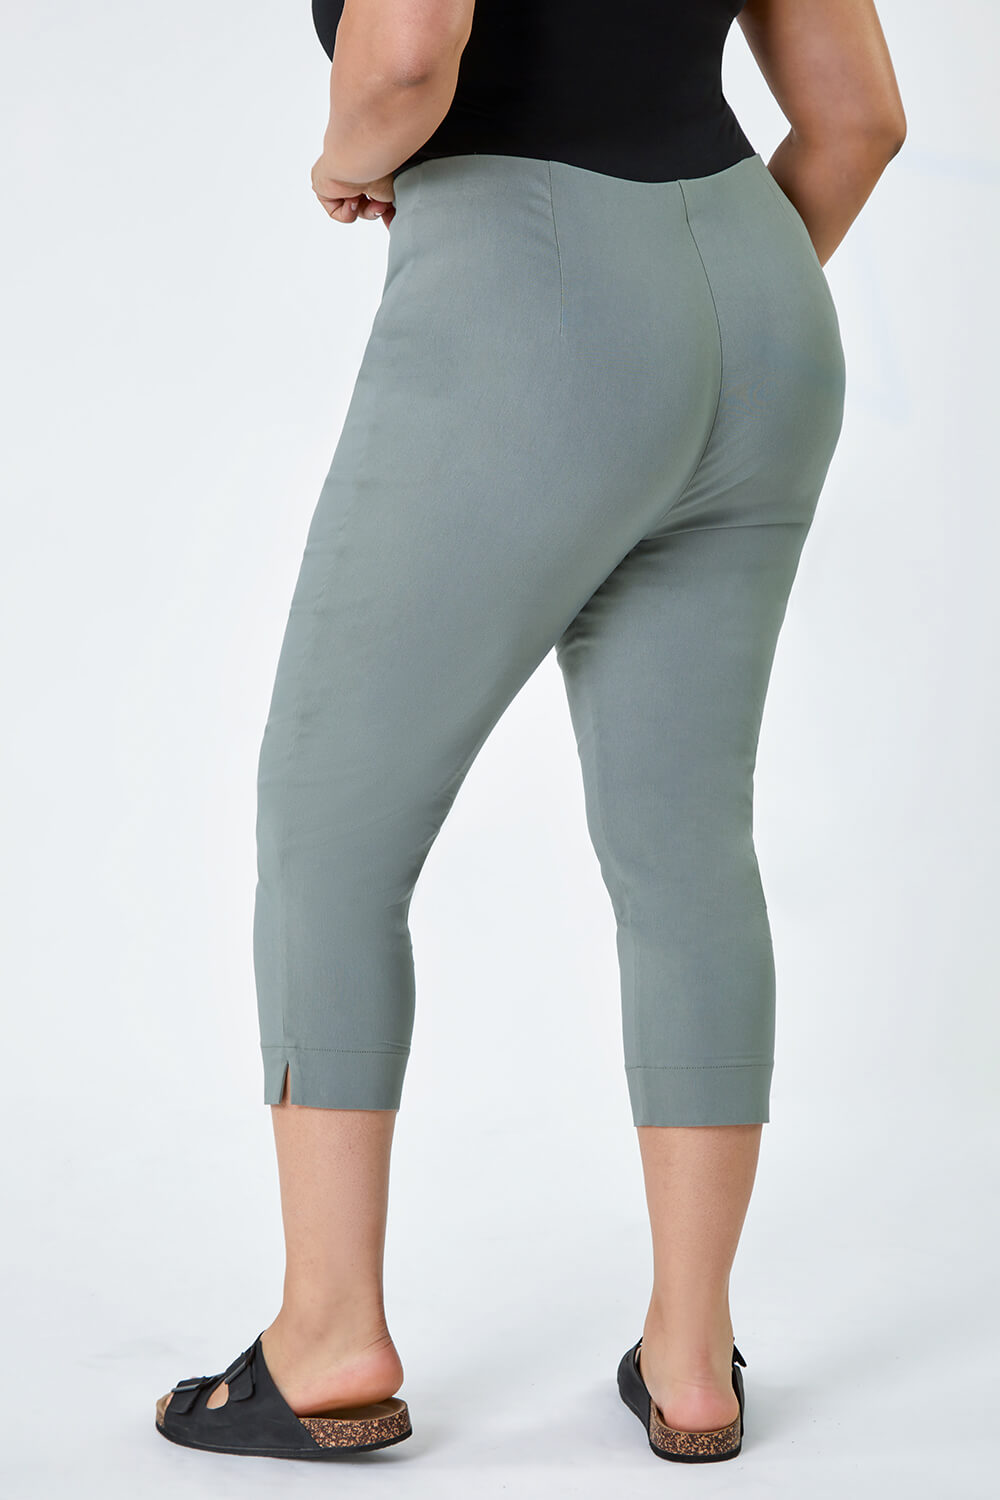 KHAKI Curve Cropped Stretch Trouser, Image 3 of 4